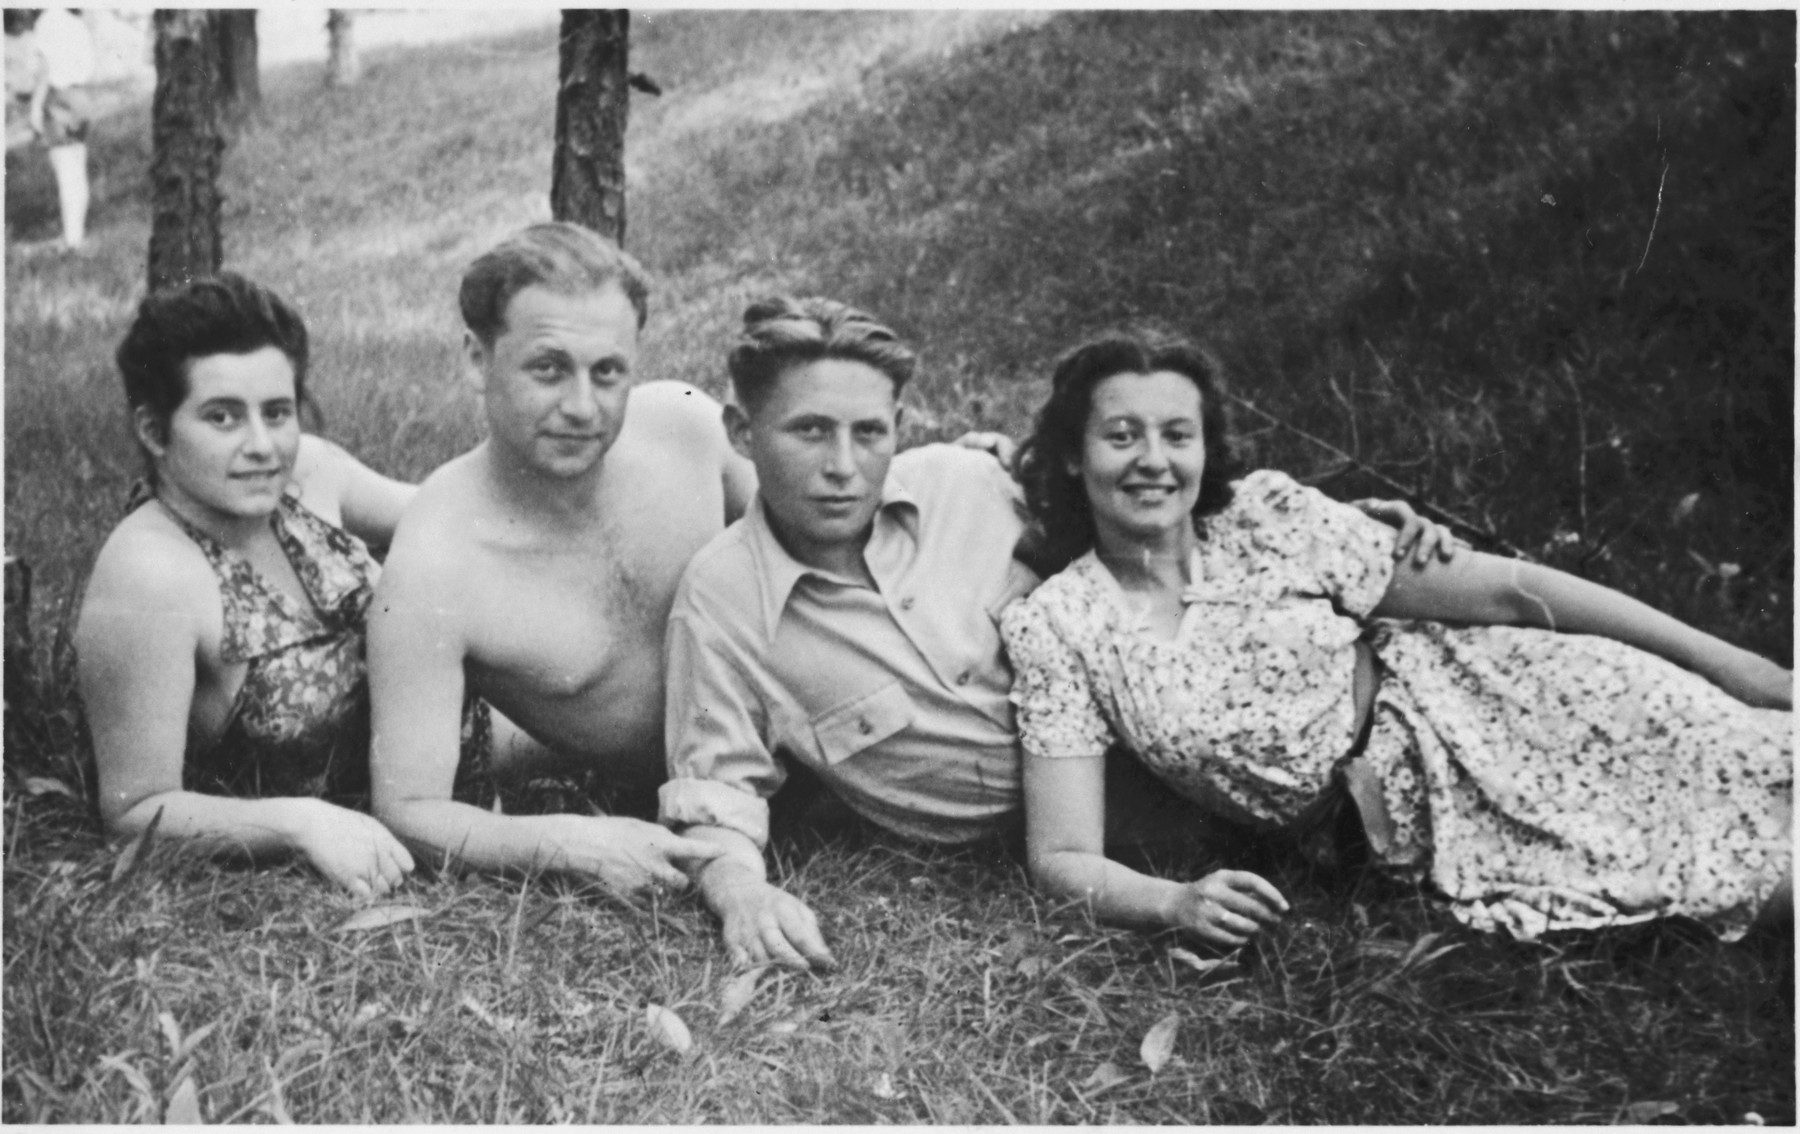 Four Jewish displaced persons lounge at the bottom of a grassy field.

Pictured are Dr. Genishevitz (second from left), his wife Ellis (far right), and two of their friends. 

Dr. Genishevitz, a partisan, studied dentistry for four years in Germany before becoming accredited and immigrating to the United States. He said he wanted to avenge the German who had killed his father, and he managed to do so.